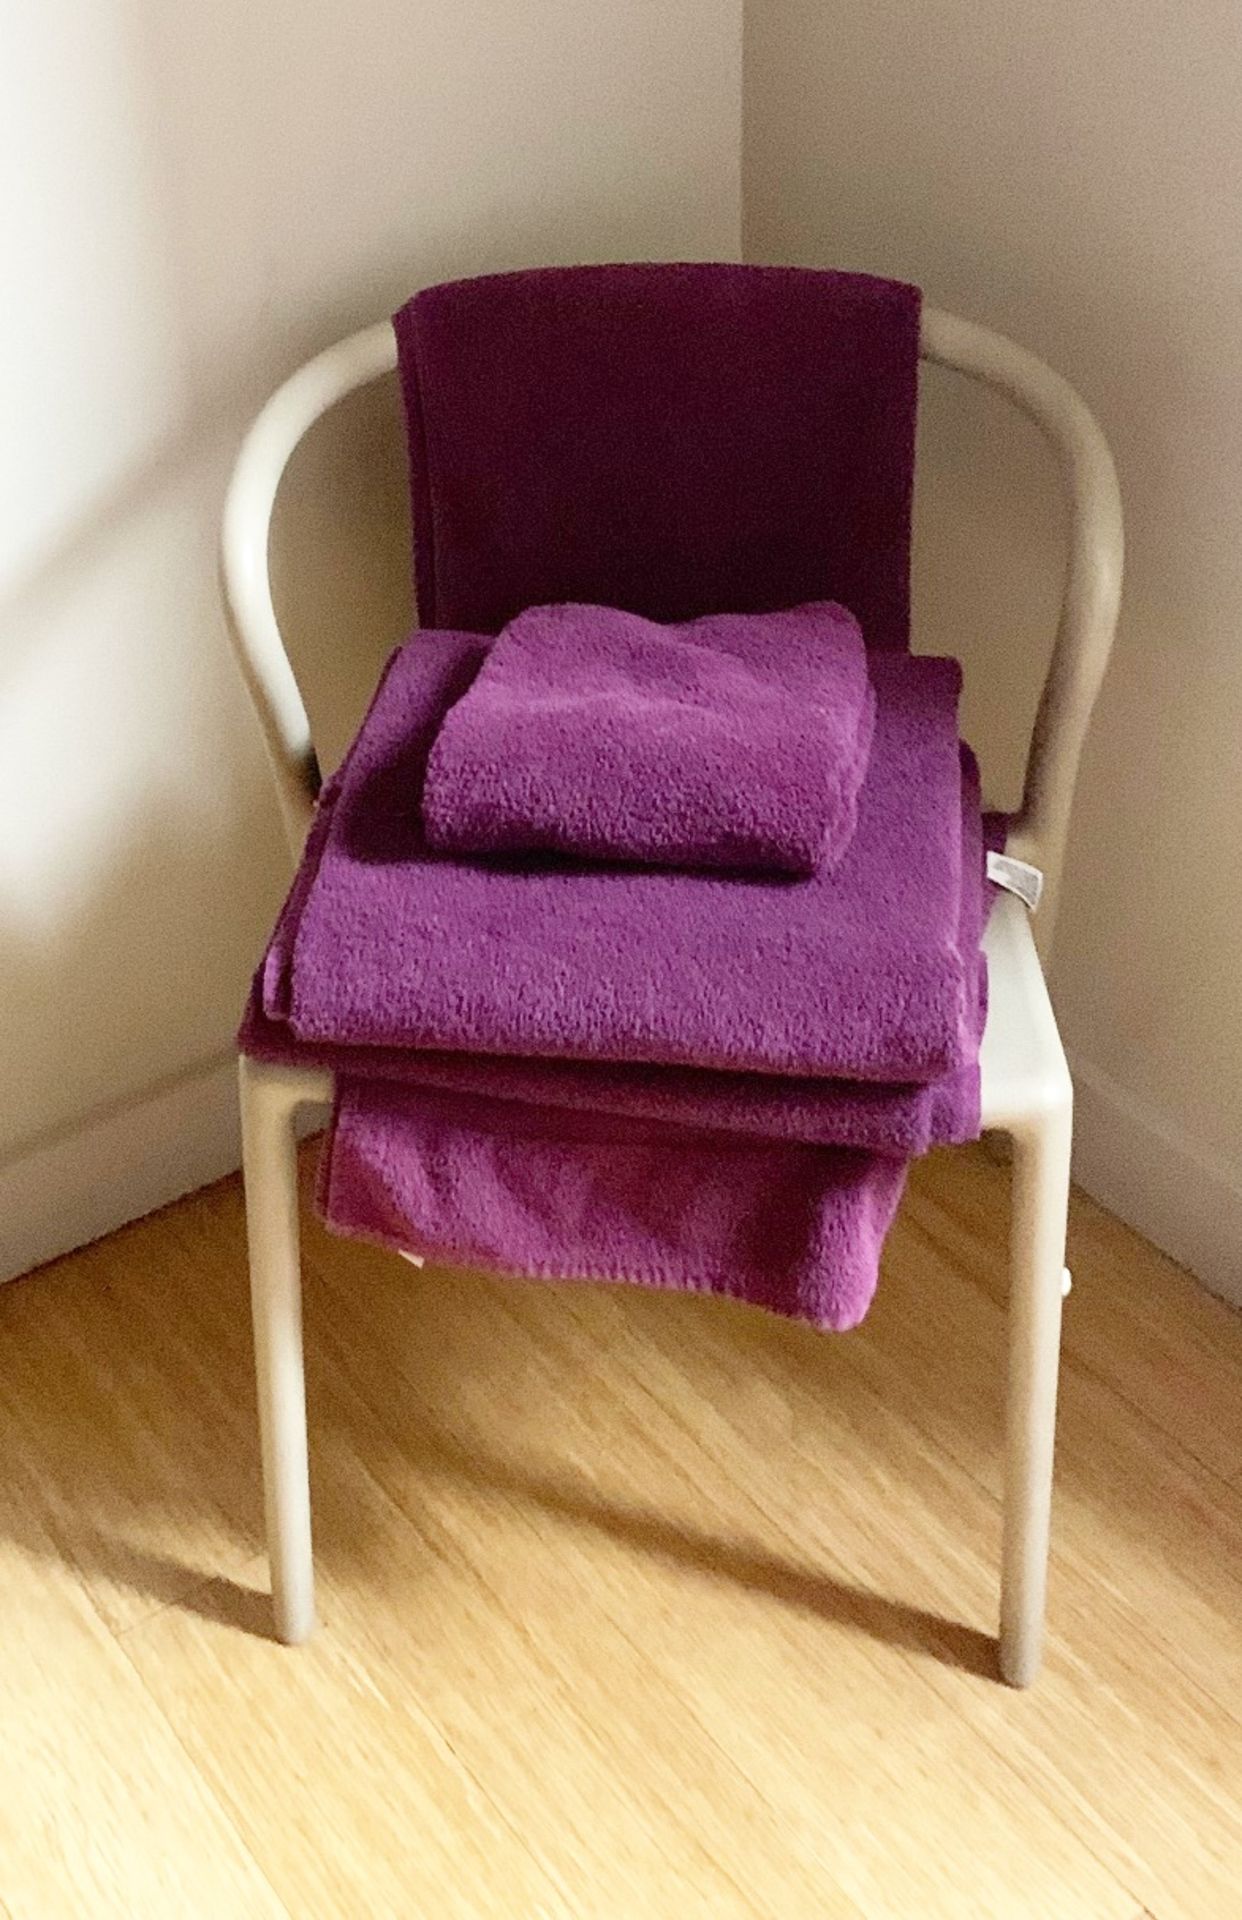 20 x Majestic Luxury 620gsm Bath Towels in Purple - Size LARGE - RRP £340 - CL587 - Location: London - Image 5 of 5